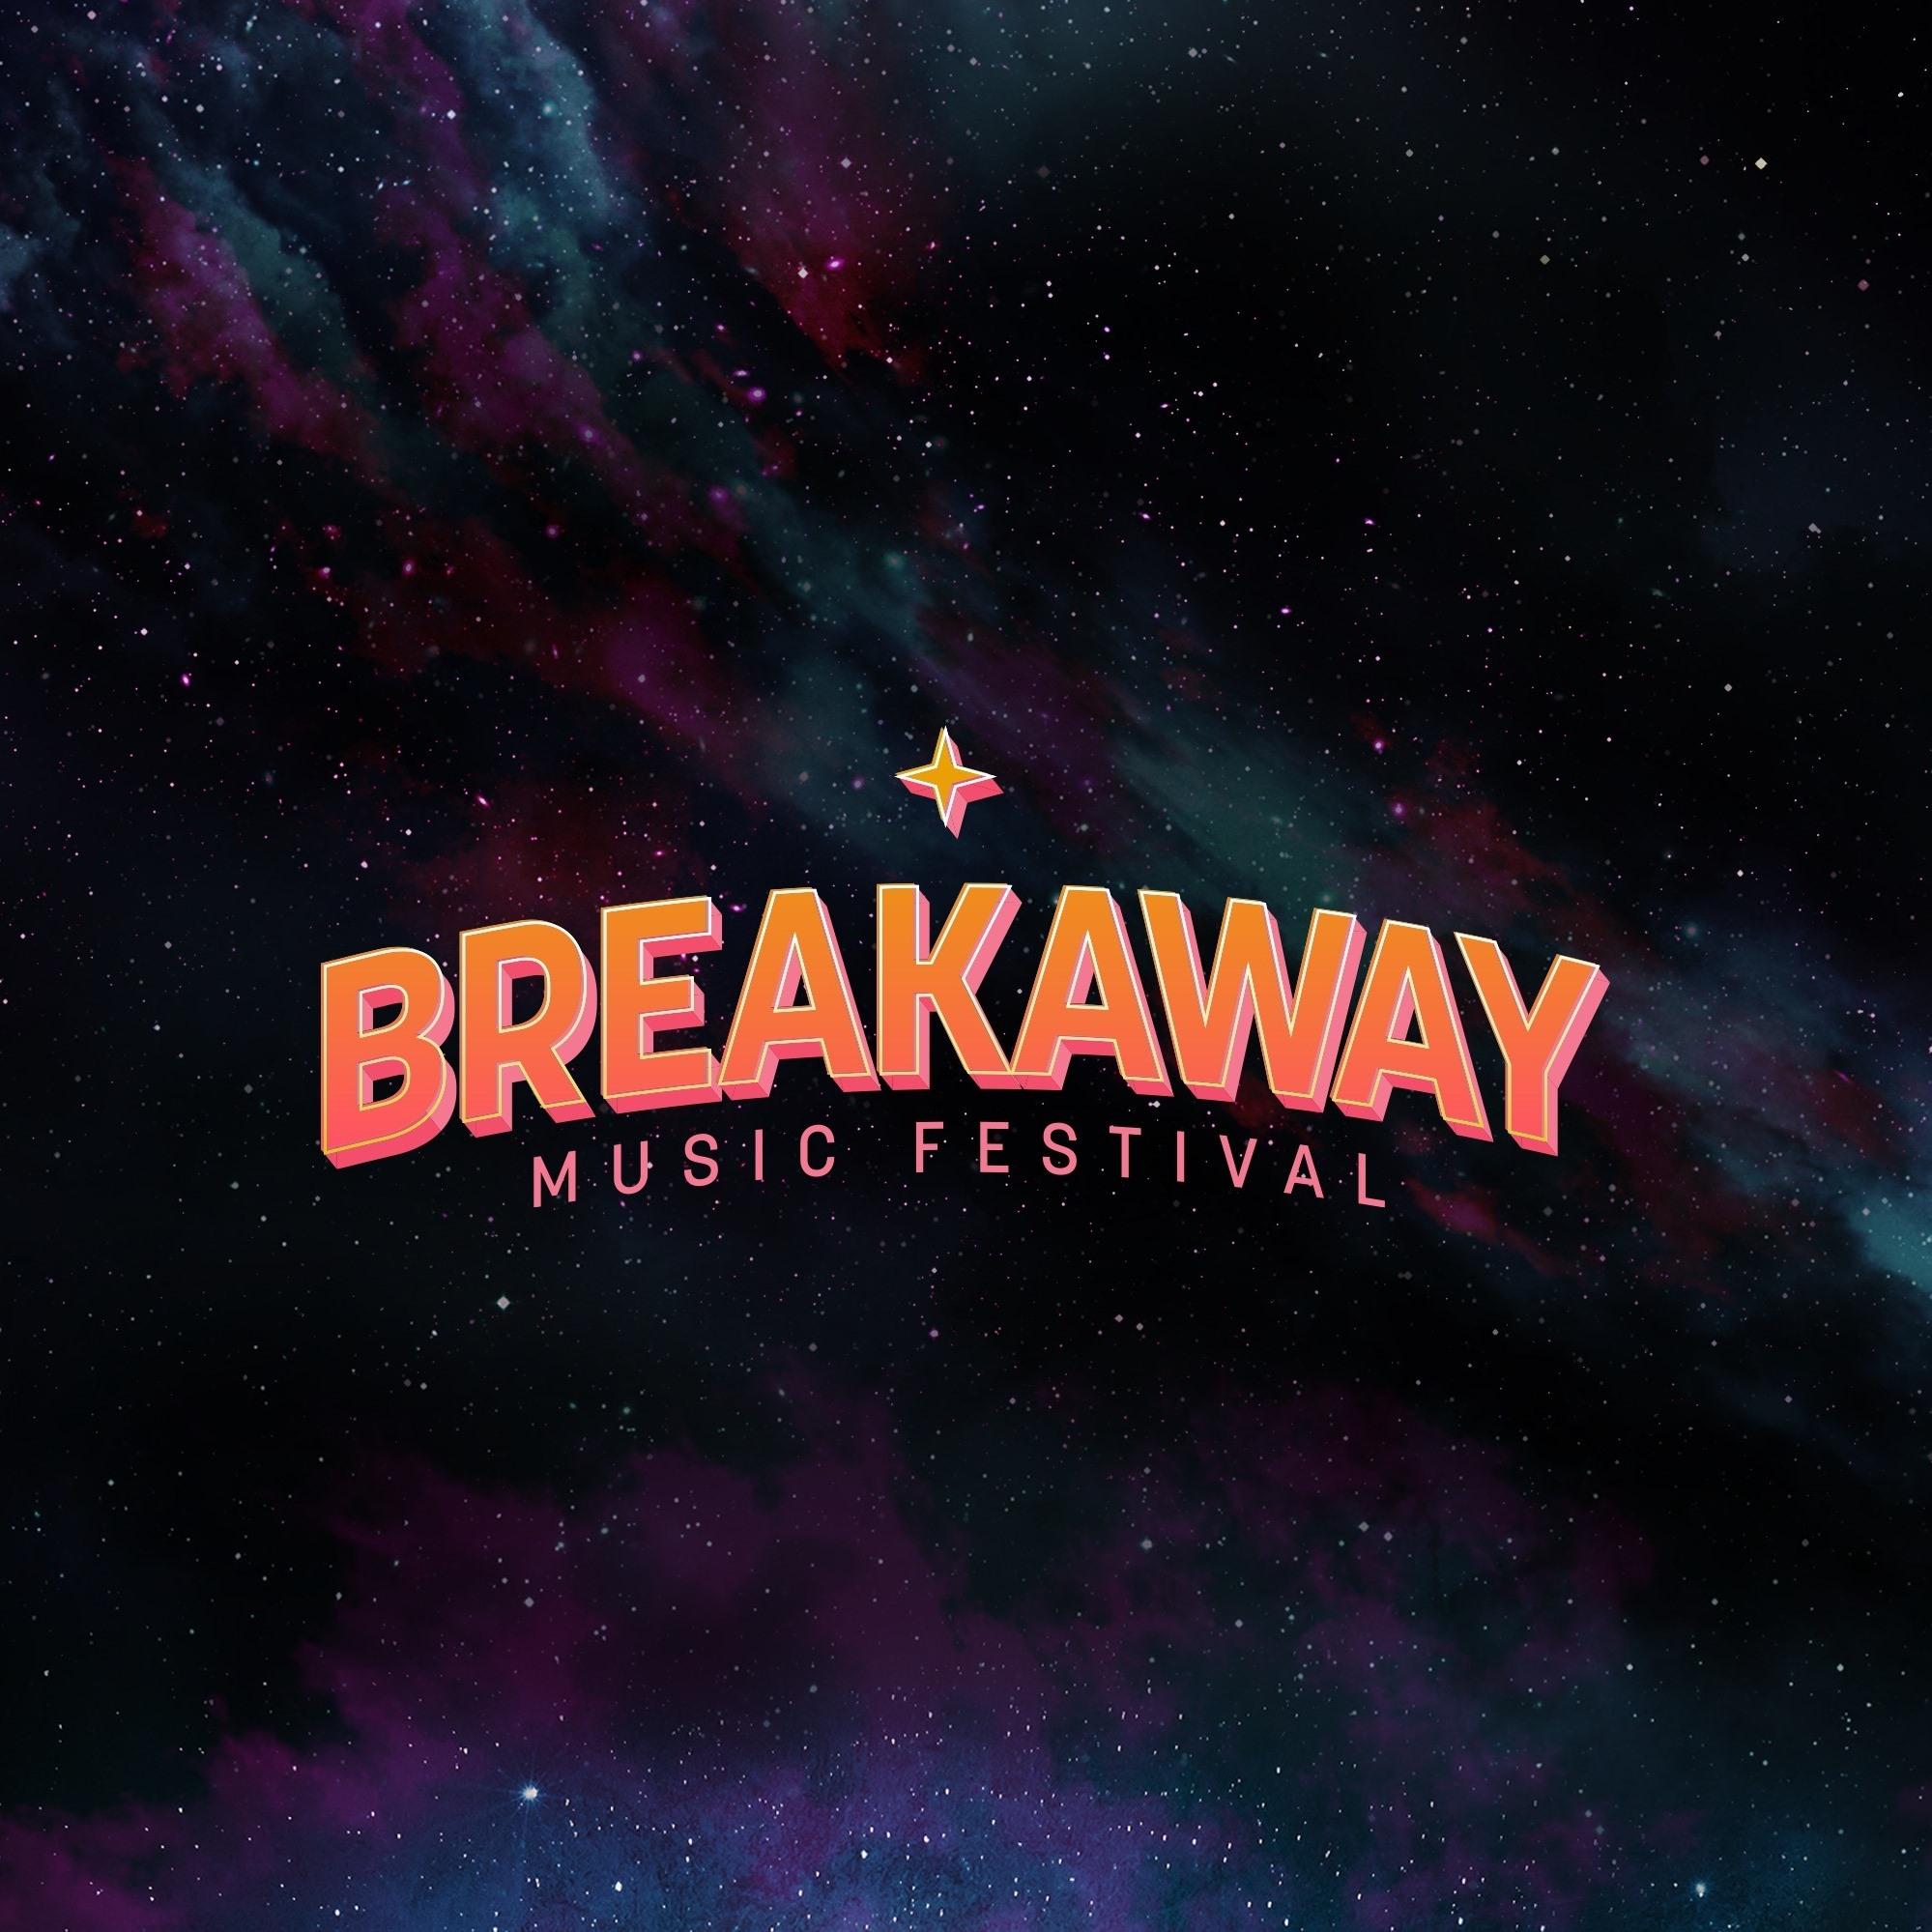 Breakaway Cancun Festival Lineup, Dates and Location